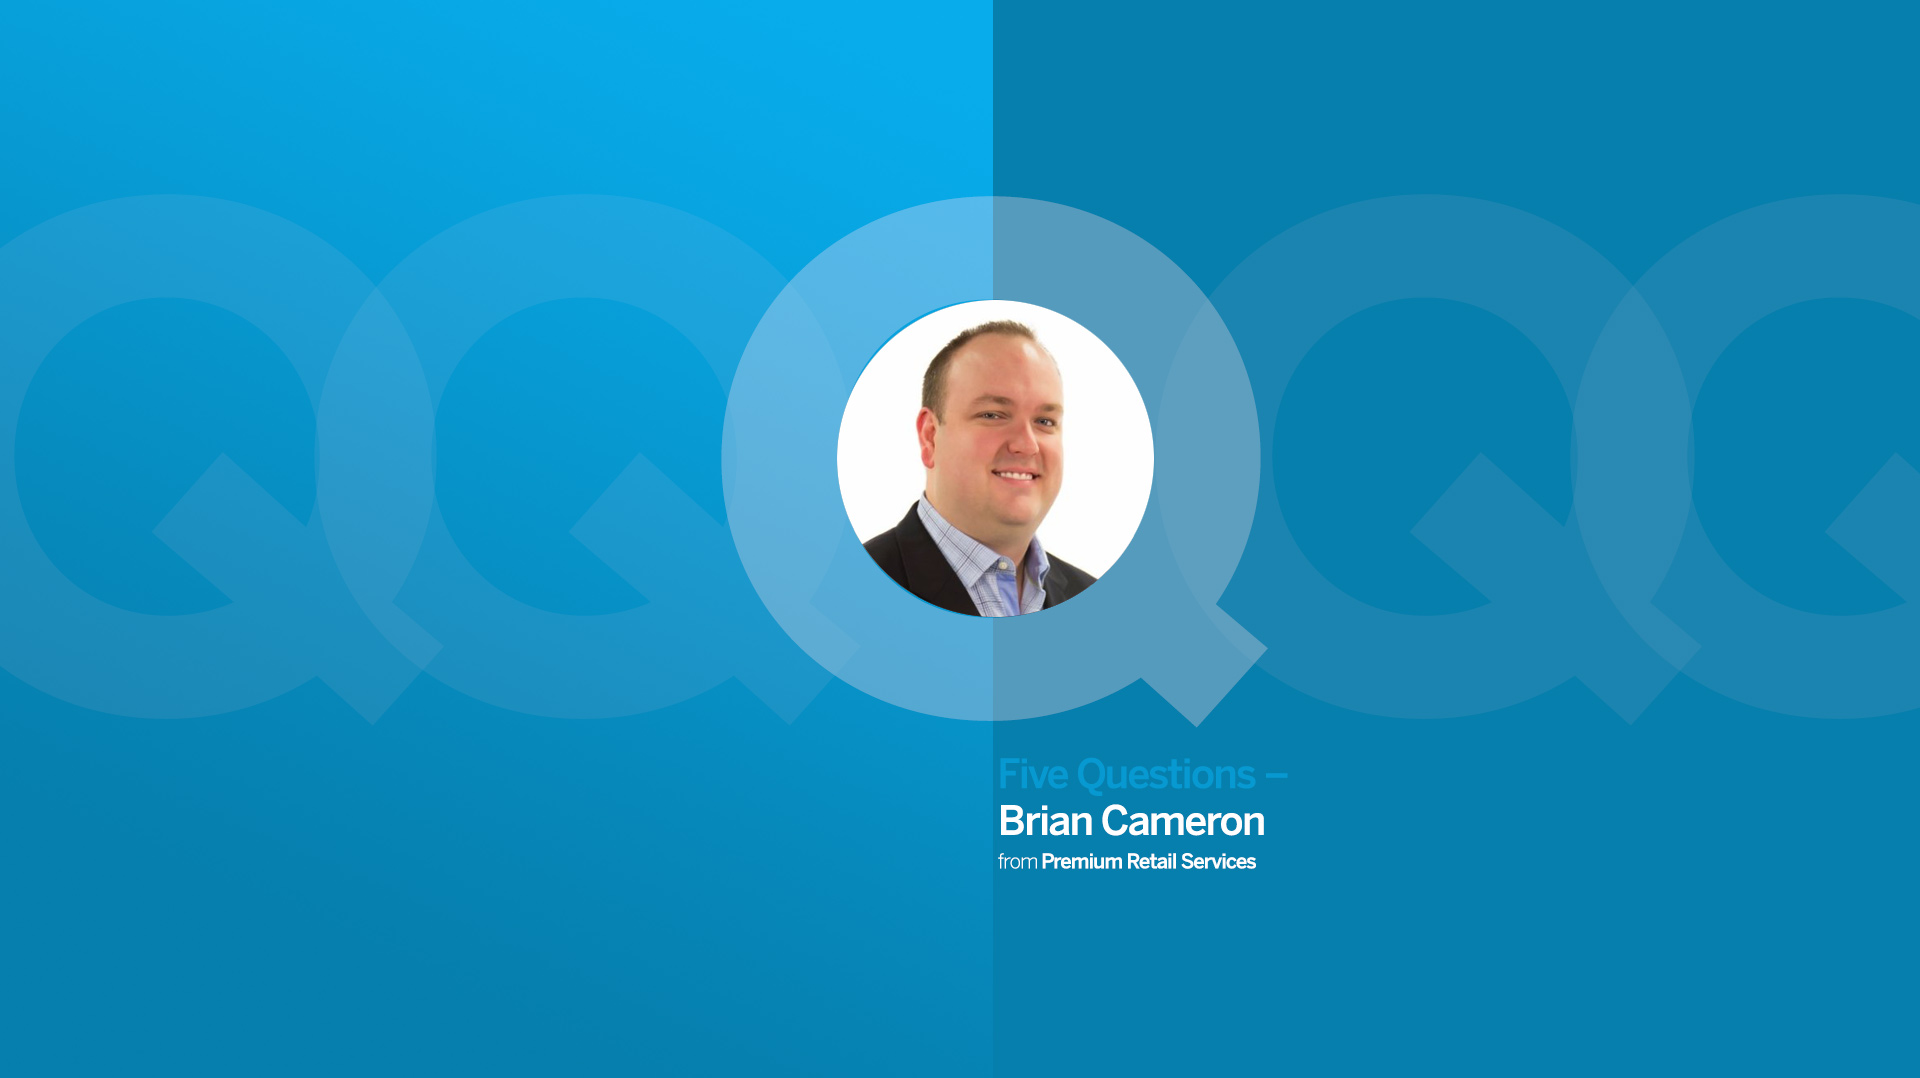 Five Questions with Brian Cameron from Premium Retail